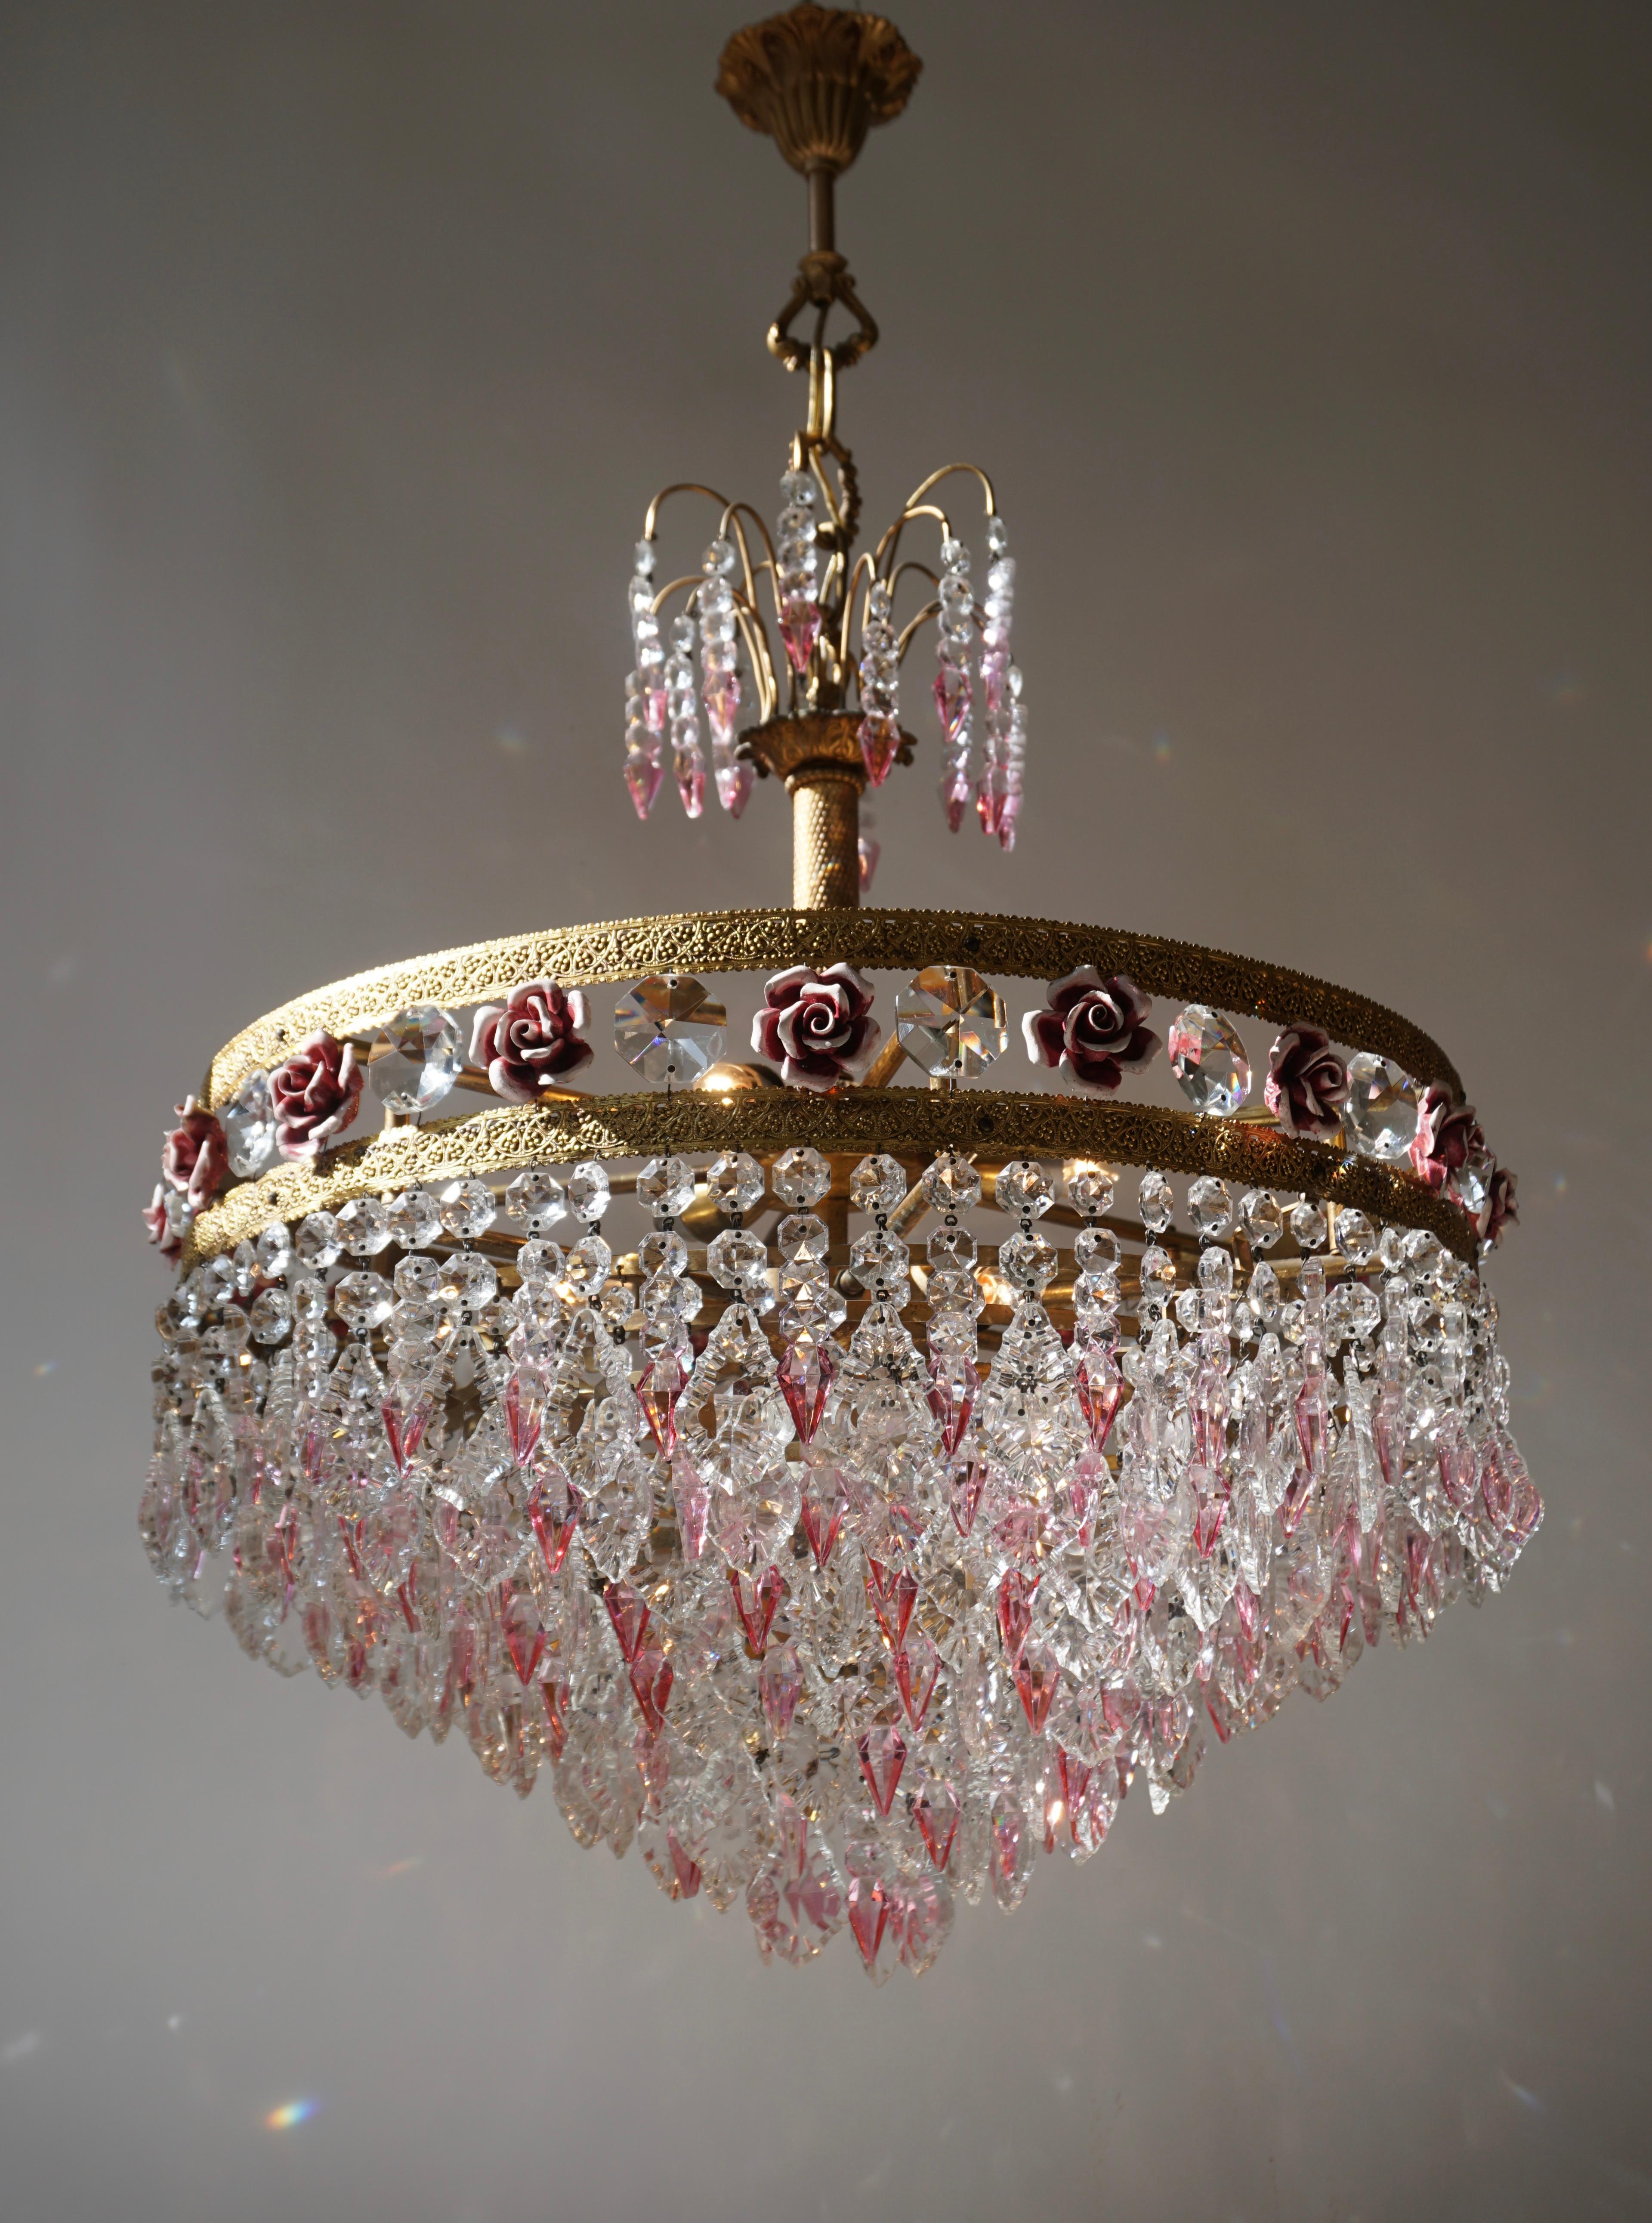 Elegante Italian brass chandelier with pink crystals and pink porcelain flowers.

The light requires seven single E14 screw fit lightbulbs (40Watt max.) LED compatible.

Measures: Diameter 61 cm.
Height fixture 75 cm.
Total height 95 cm.